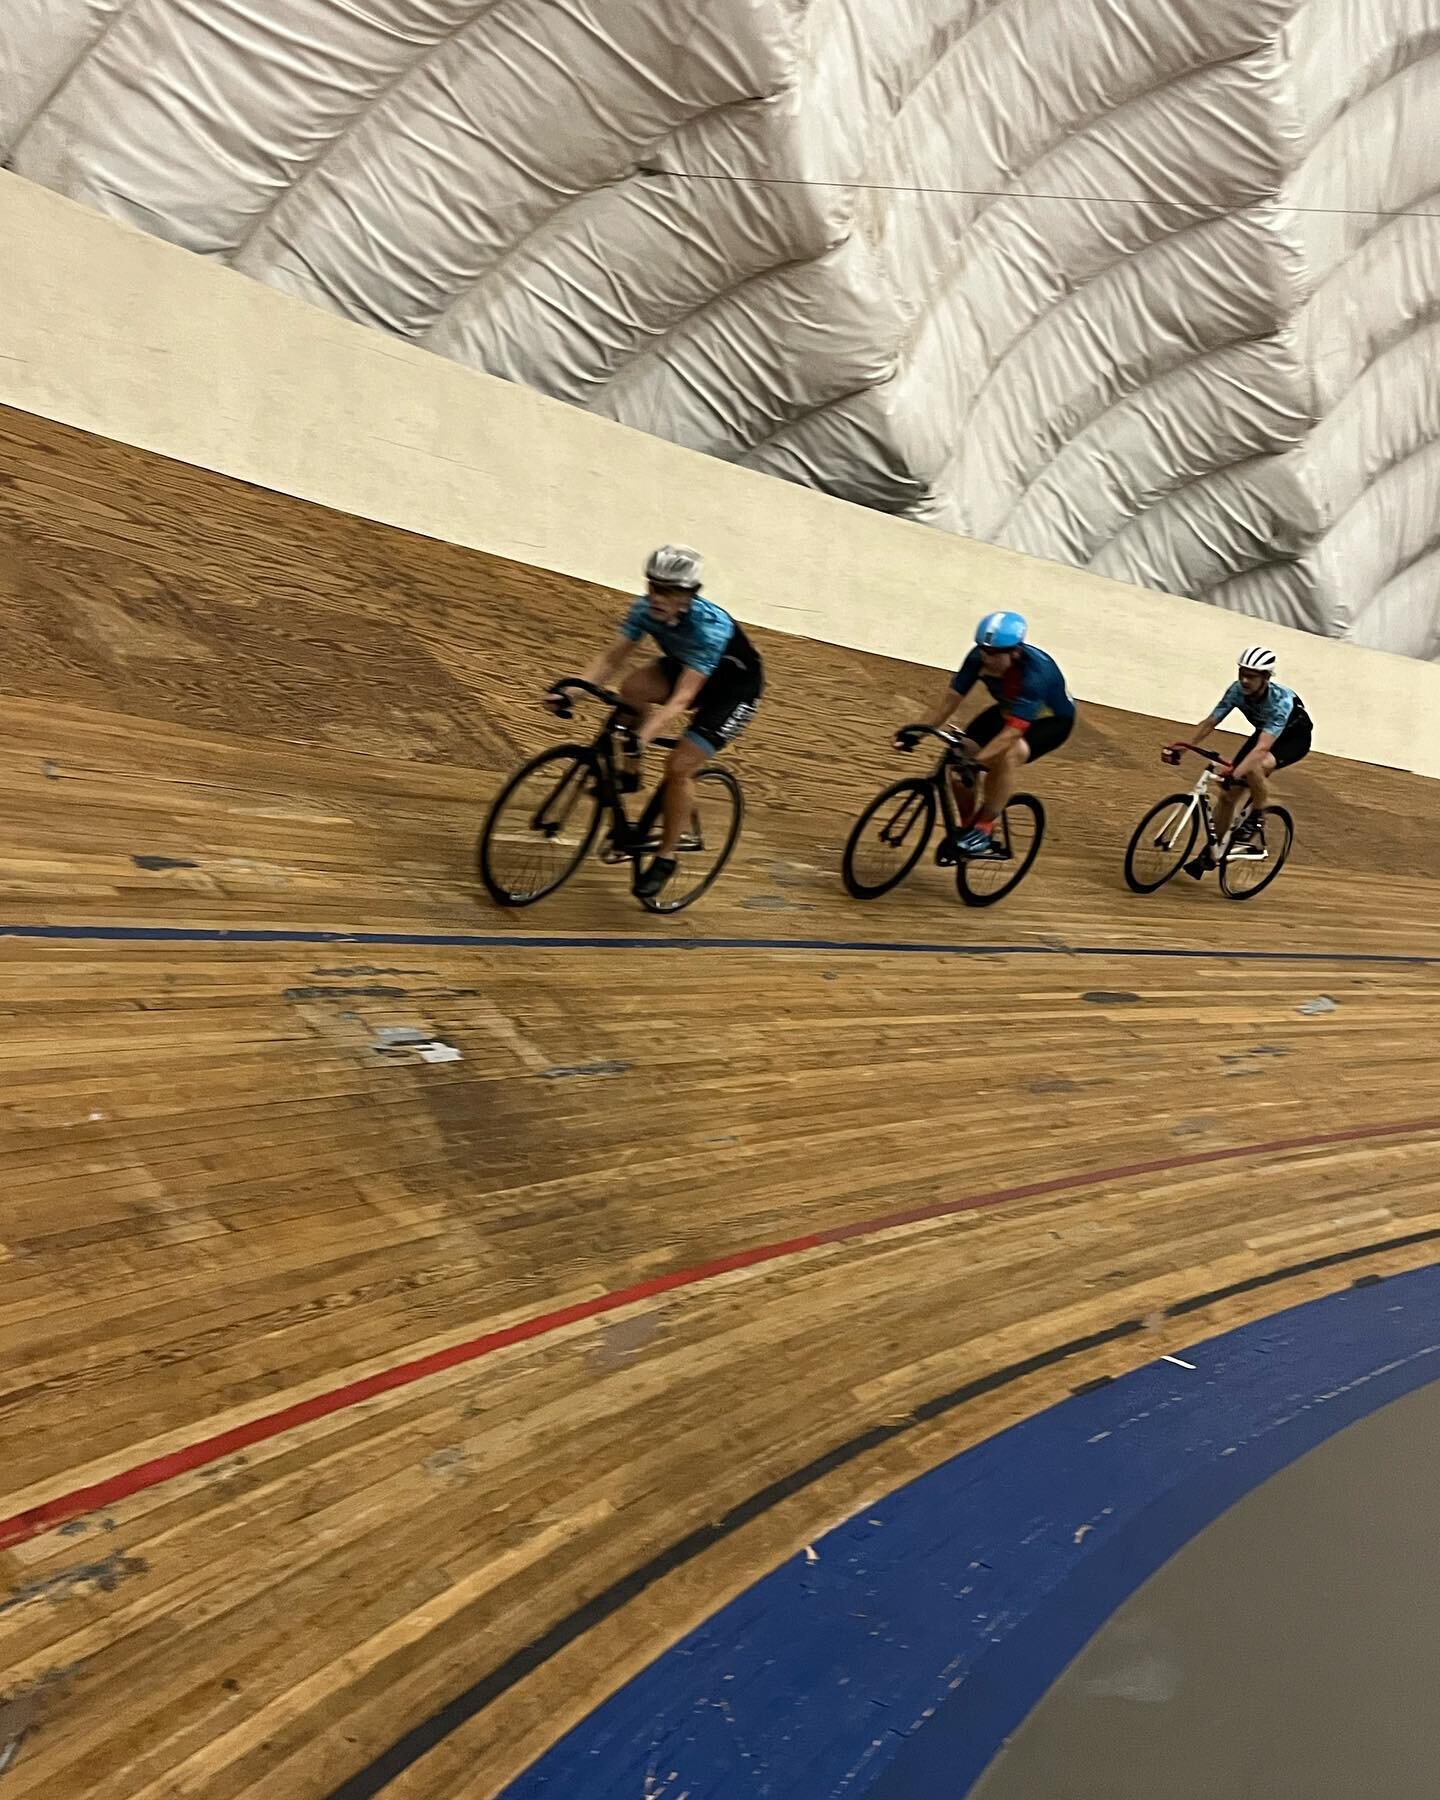 A fun day learning to track ride at the @burnabyvelodromeclub .  Thanks to Shame for organizing and to Coach Daniel - had us first timers flying in no time! #trackcycling #burnaby #burnabyvelodrome